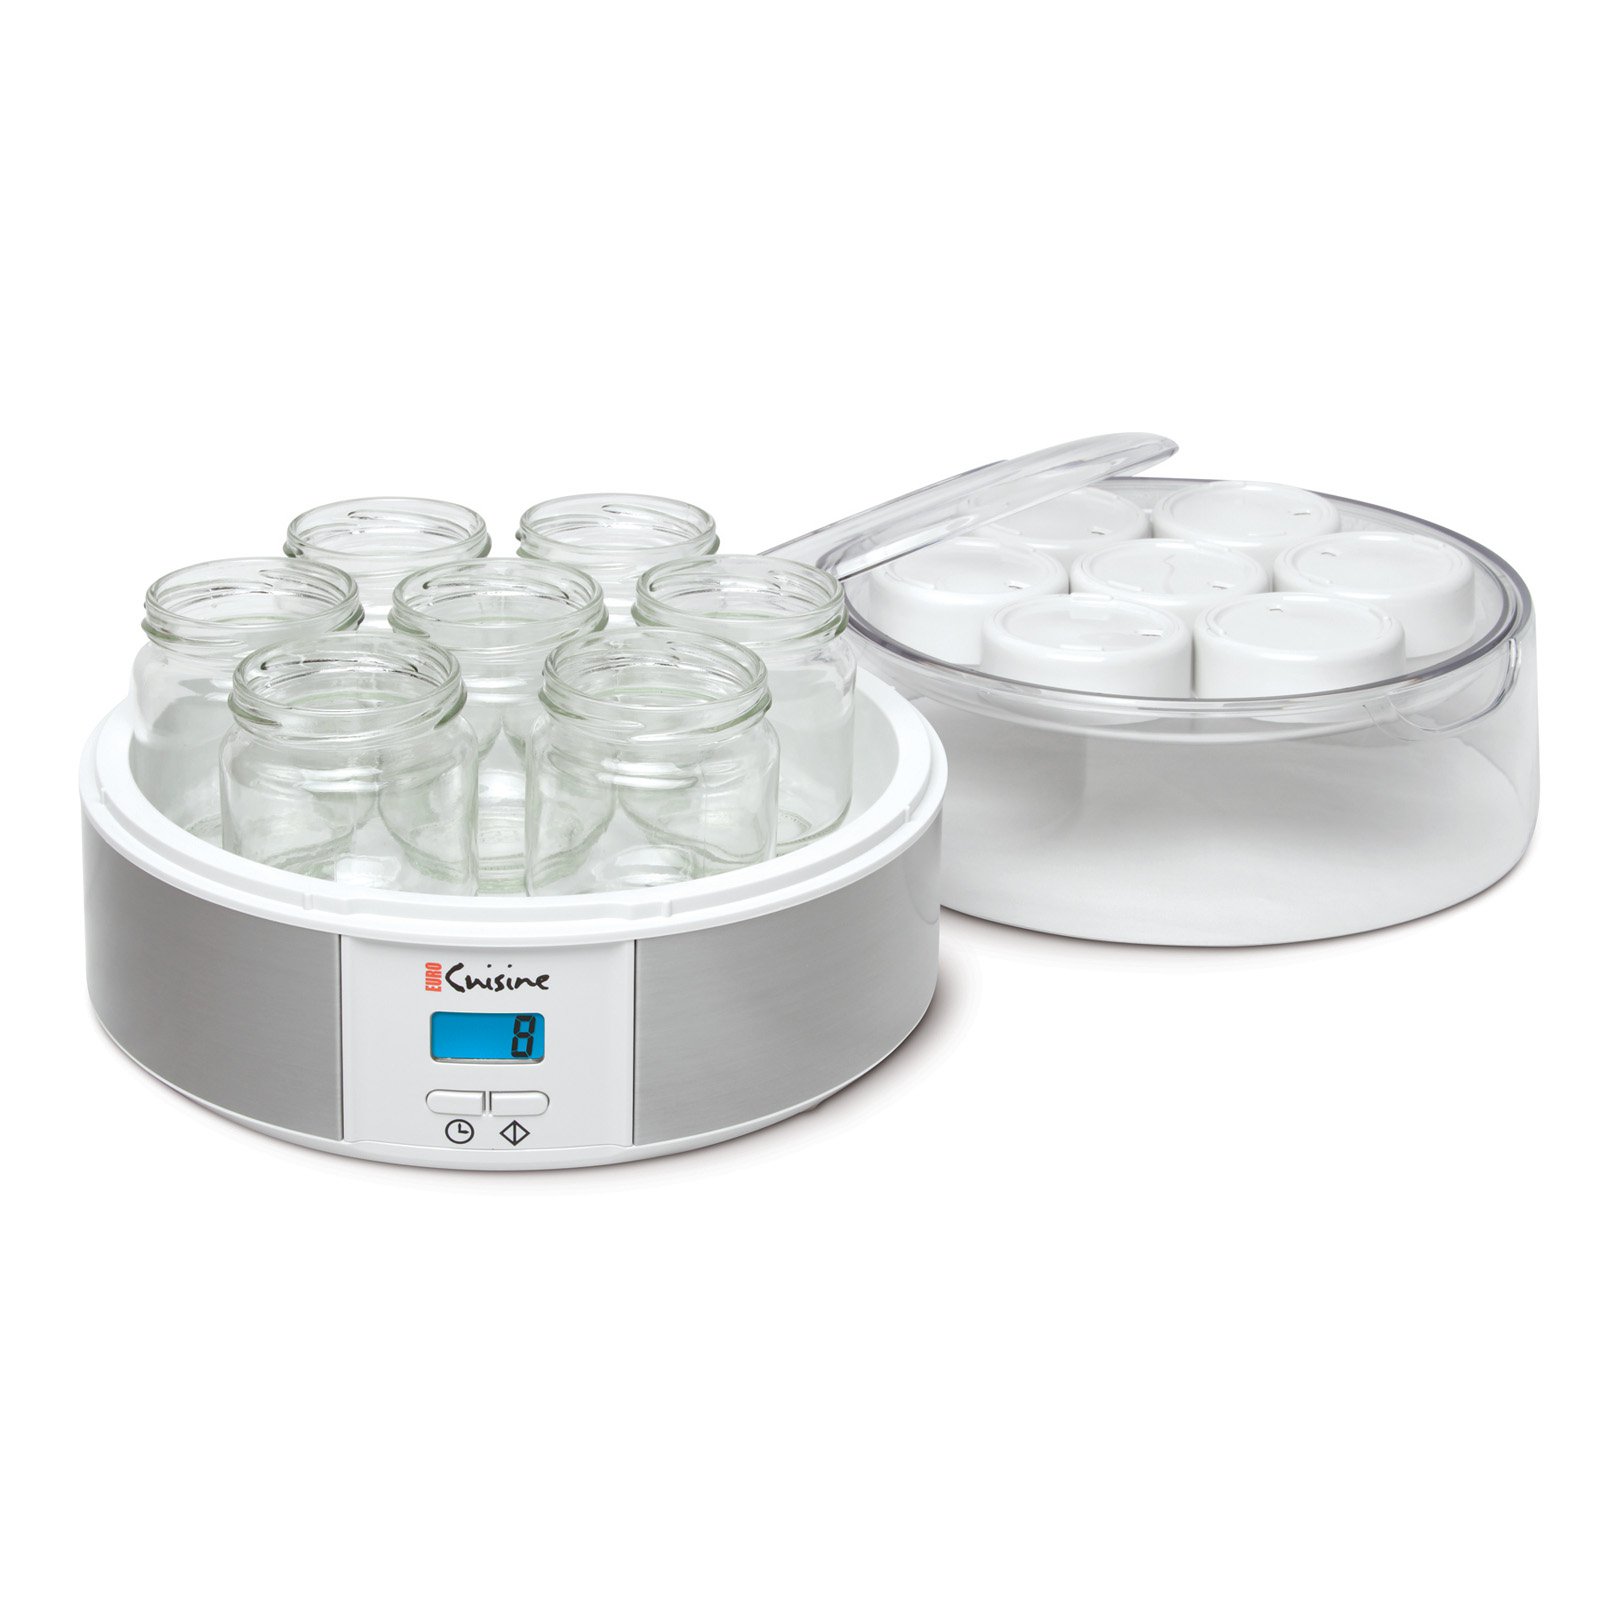 Euro Cuisine YMX650 Digital Yogurt Maker with 7 Glass Jars and 15 hours Timer - image 2 of 4